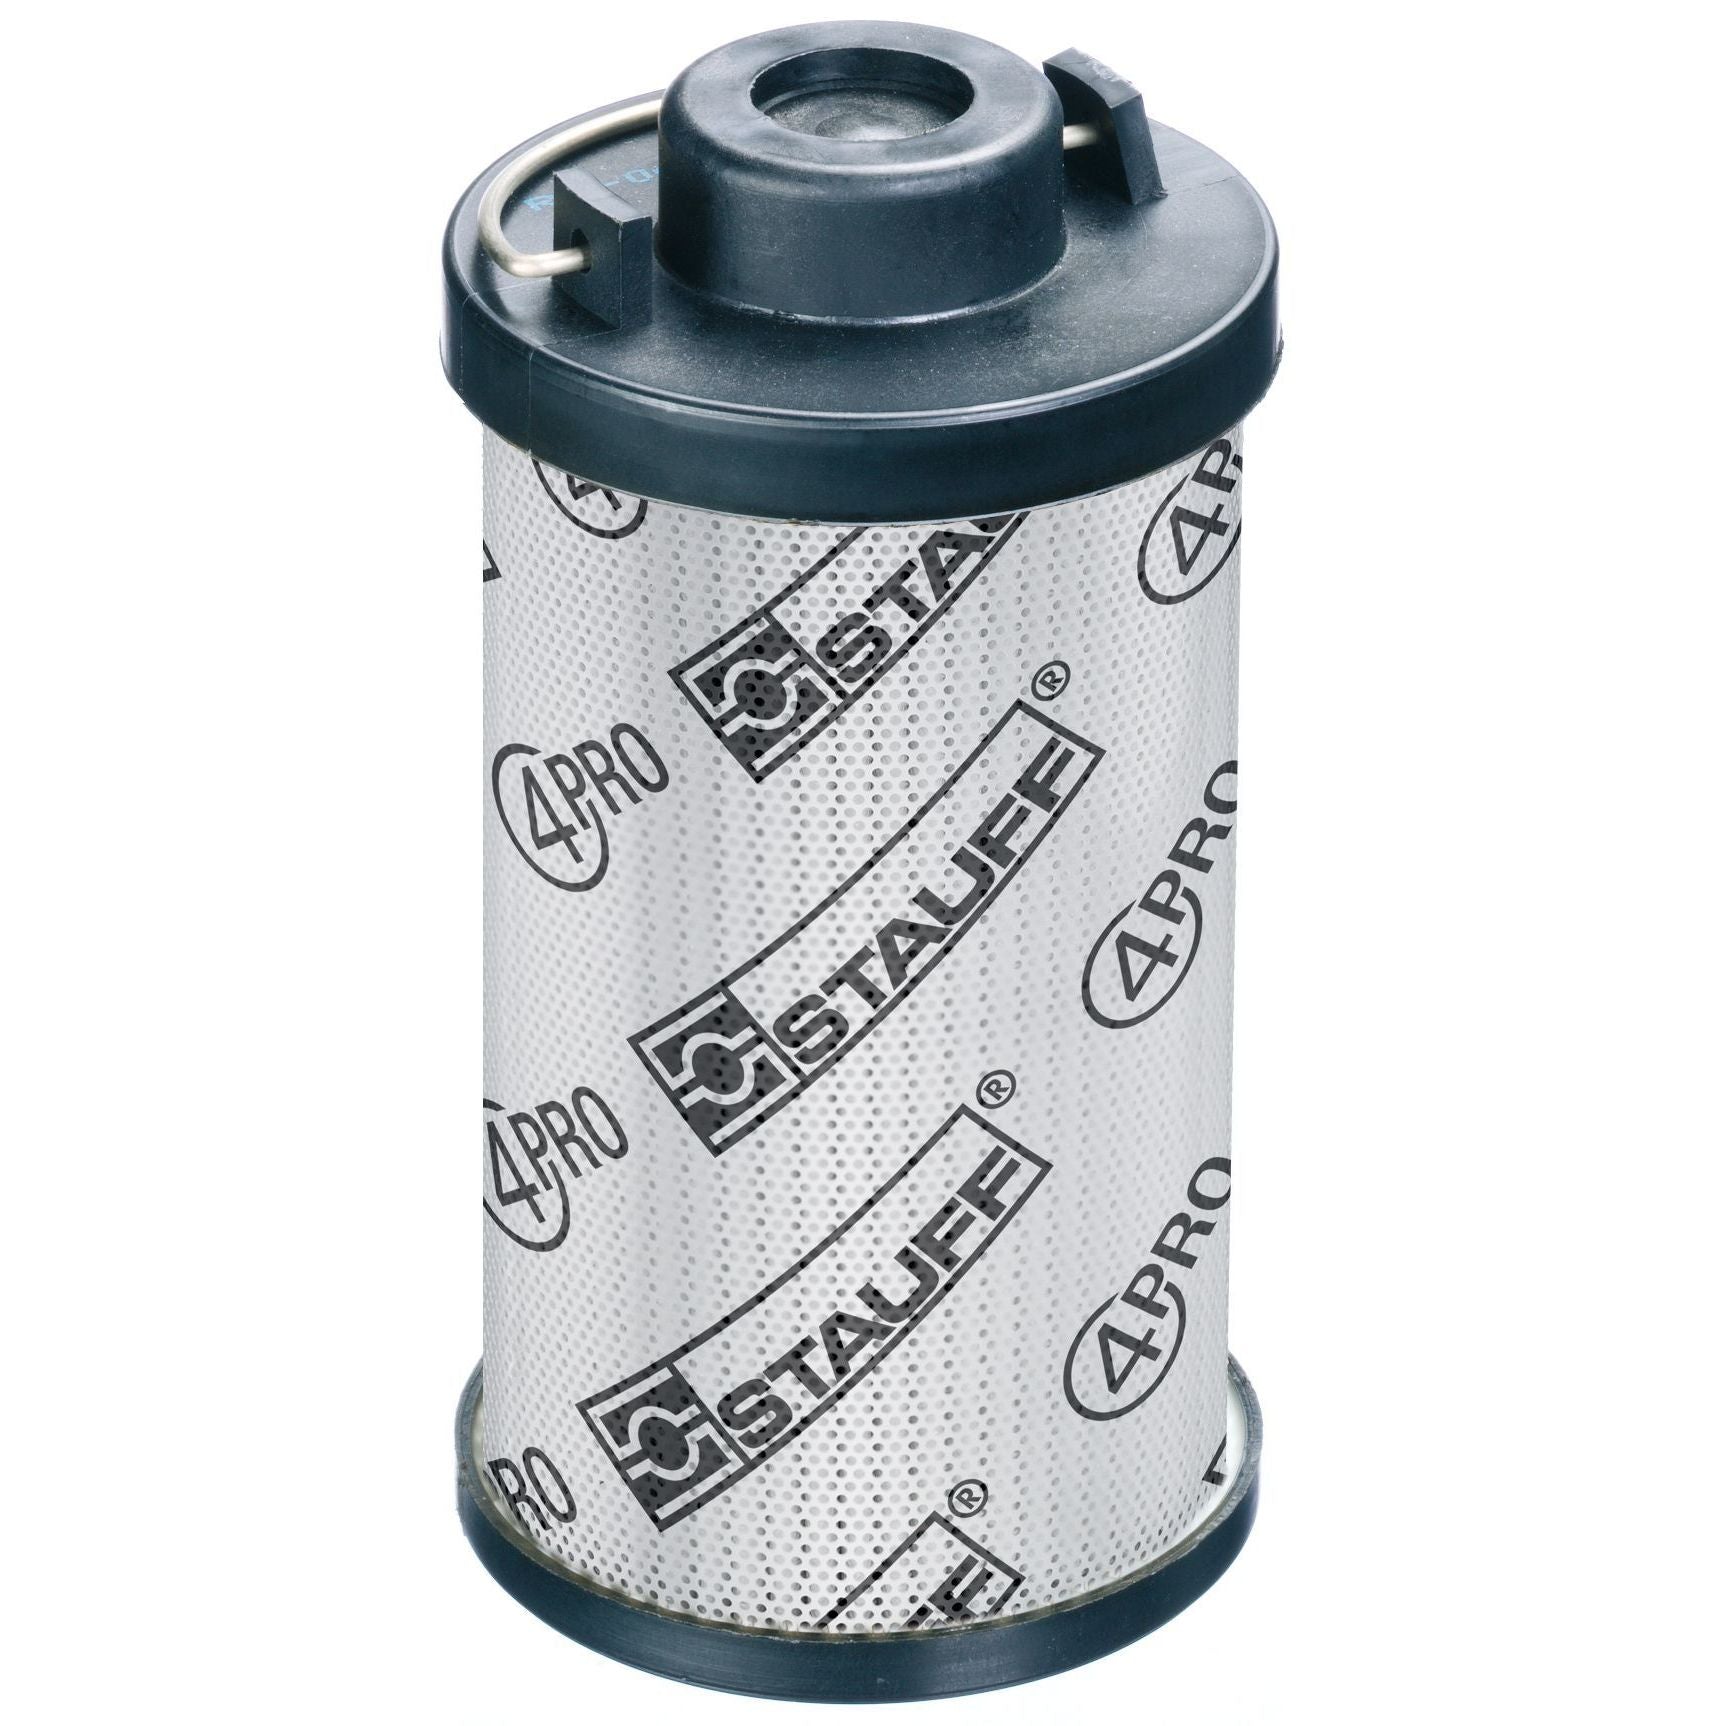 RE-250-S-200-B/2 : Stauff RF-250 Series Filter Element, 200 Micron, Stainless Mesh Media, 435psi Collapse Differential, Buna